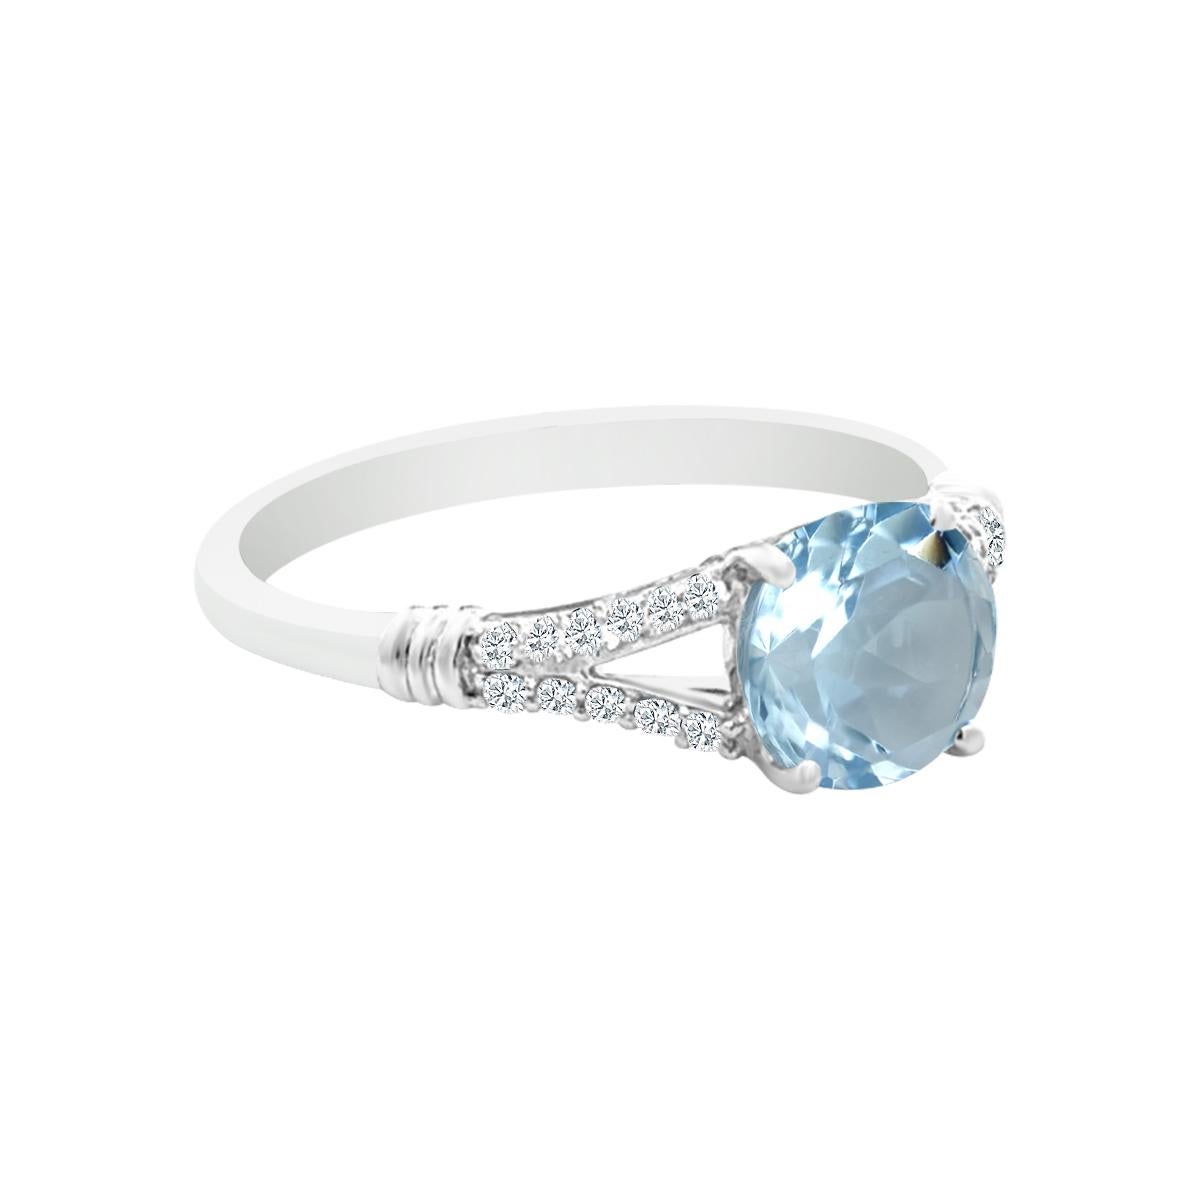 This Mesmerizing 7mm Round Cut Natural 1.06cts Aquamarine Gemstone With White Diamond In This Elegant Women's Ring, Fashioned In 14K White Gold Is Just Right For a Special Occasion Or Anytime You Want To Spice Up Your Everyday Outfit.


Style#